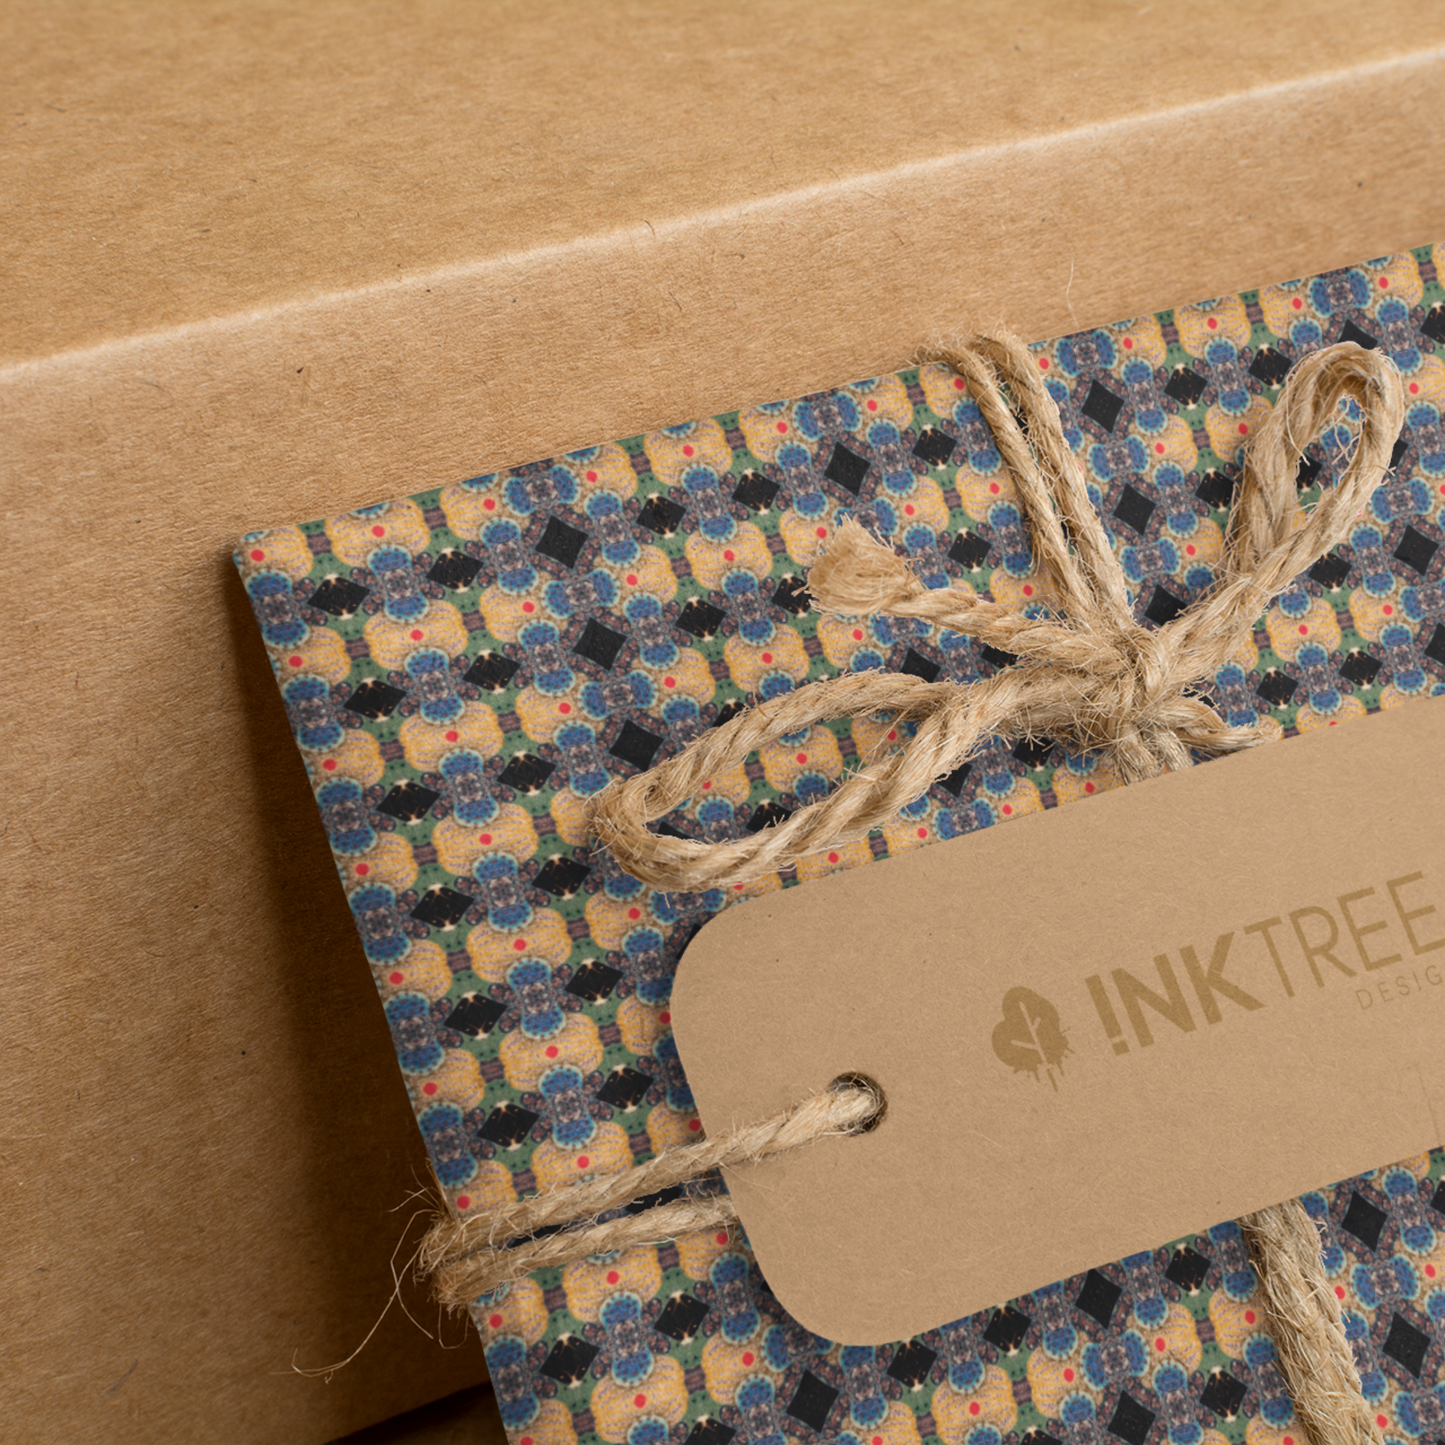 A present wrapped with a gold, black, blue, green red and white oriental looking pattern, tied with brown string with a brown paper tag with ink tree design logo on it, leaning on a brown paper background.